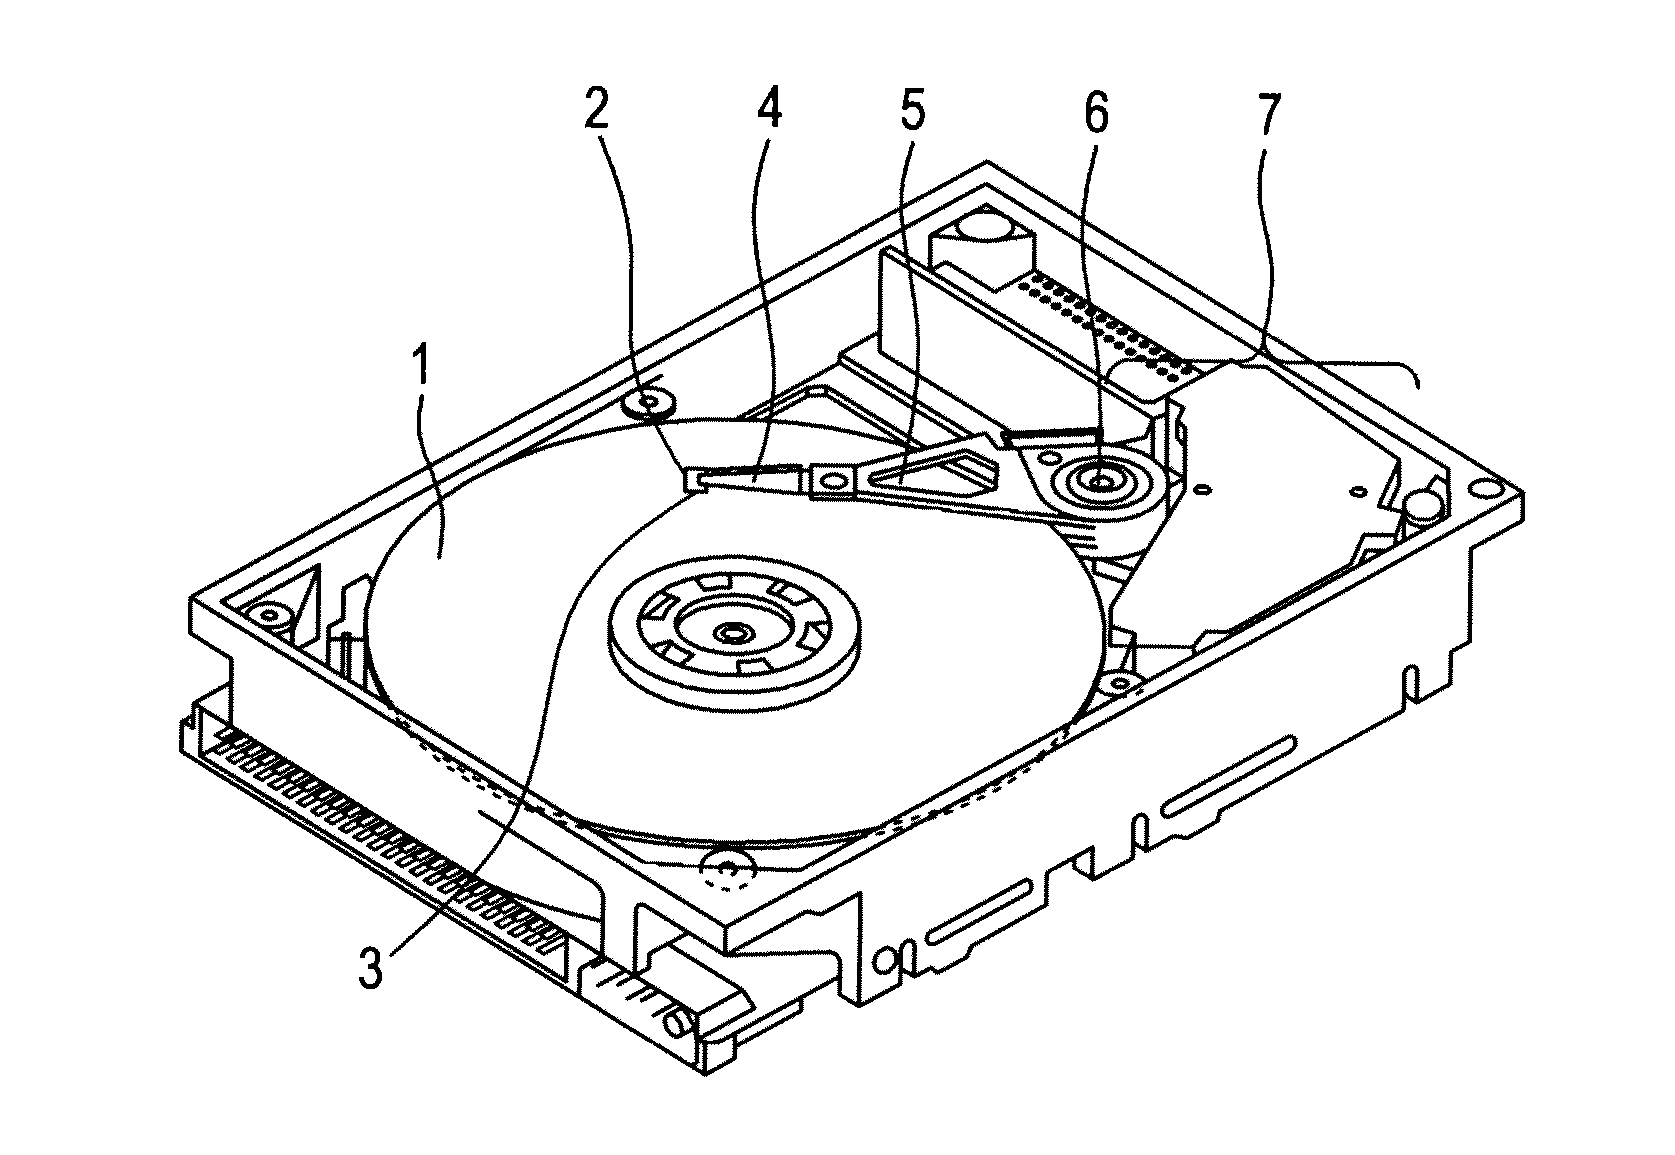 Thermally assisted magnetic recording device